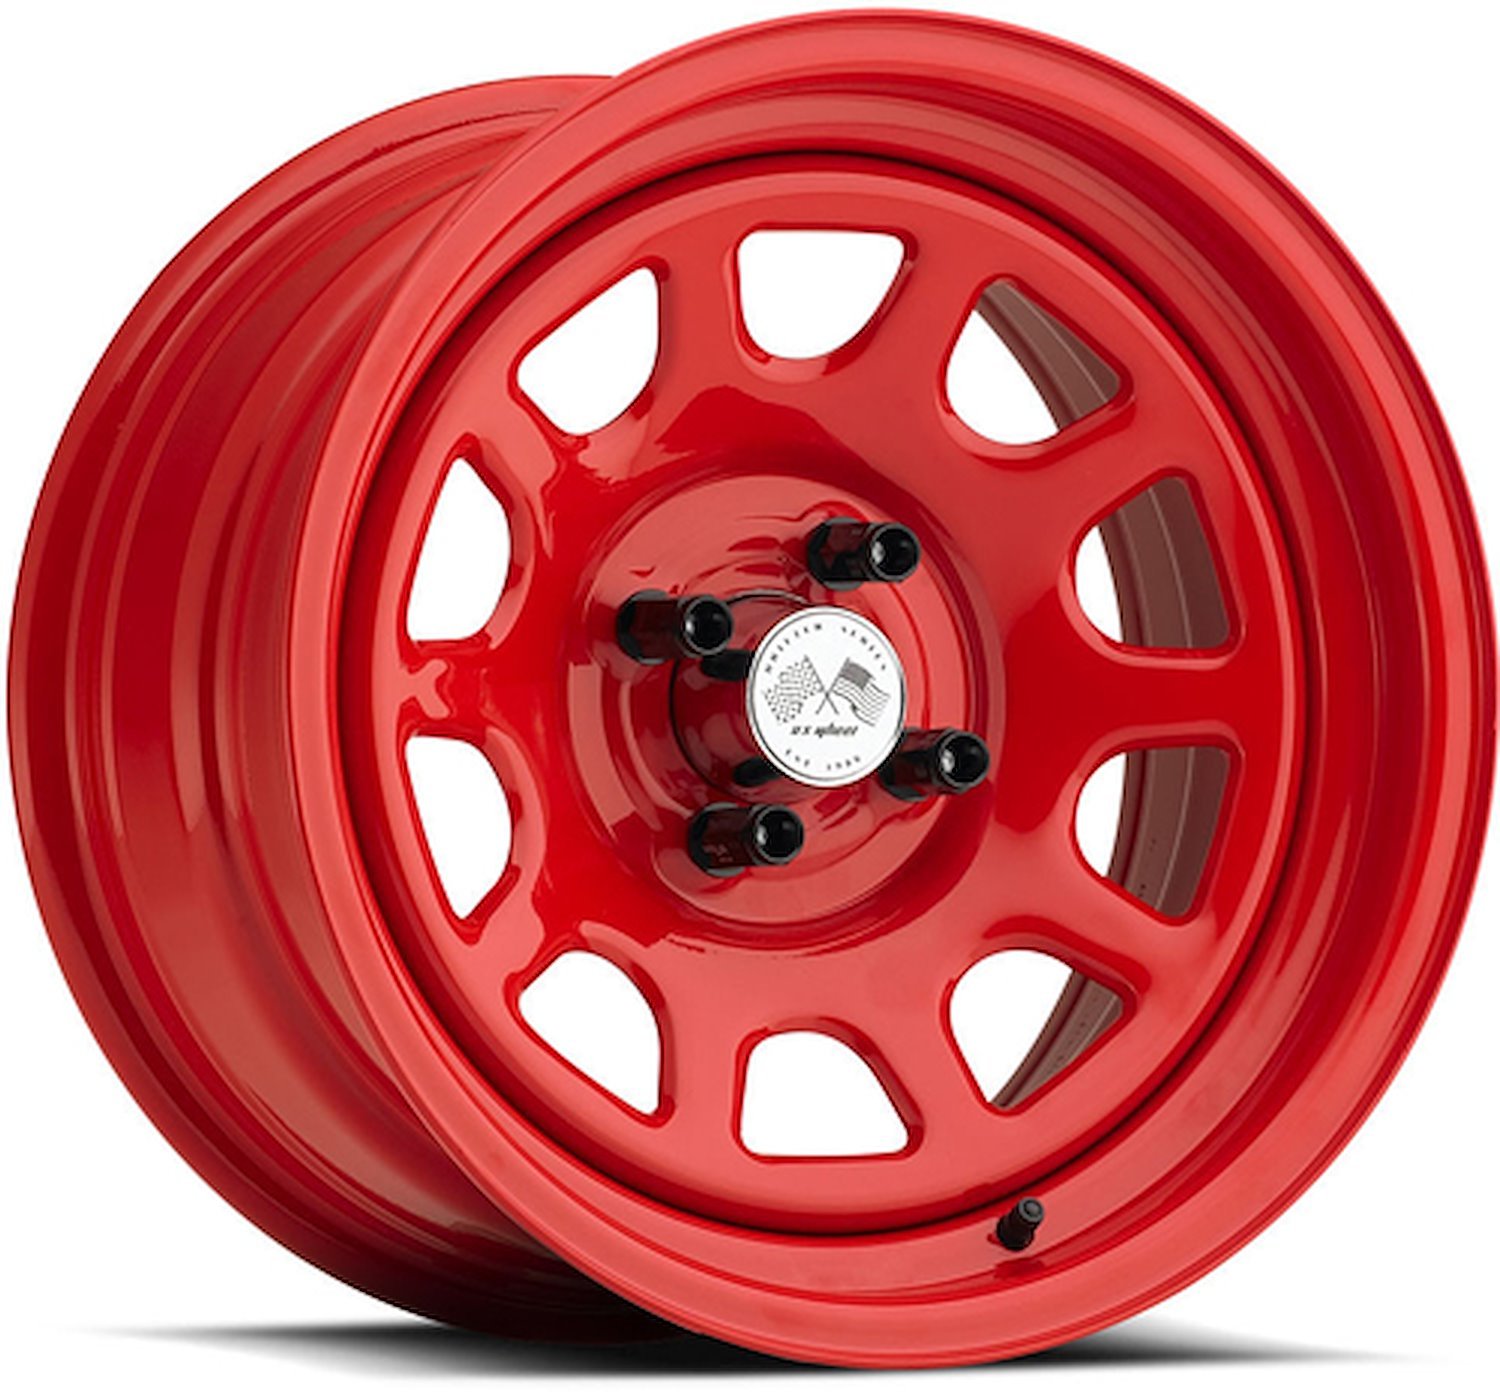 PAINTED DAYTONA FWD DRIFTER RED 17 x 9 4 x 100 Bolt Circle 5 Back Spacing 0 offset 266 Center Bore 1400 lbs Load Rating